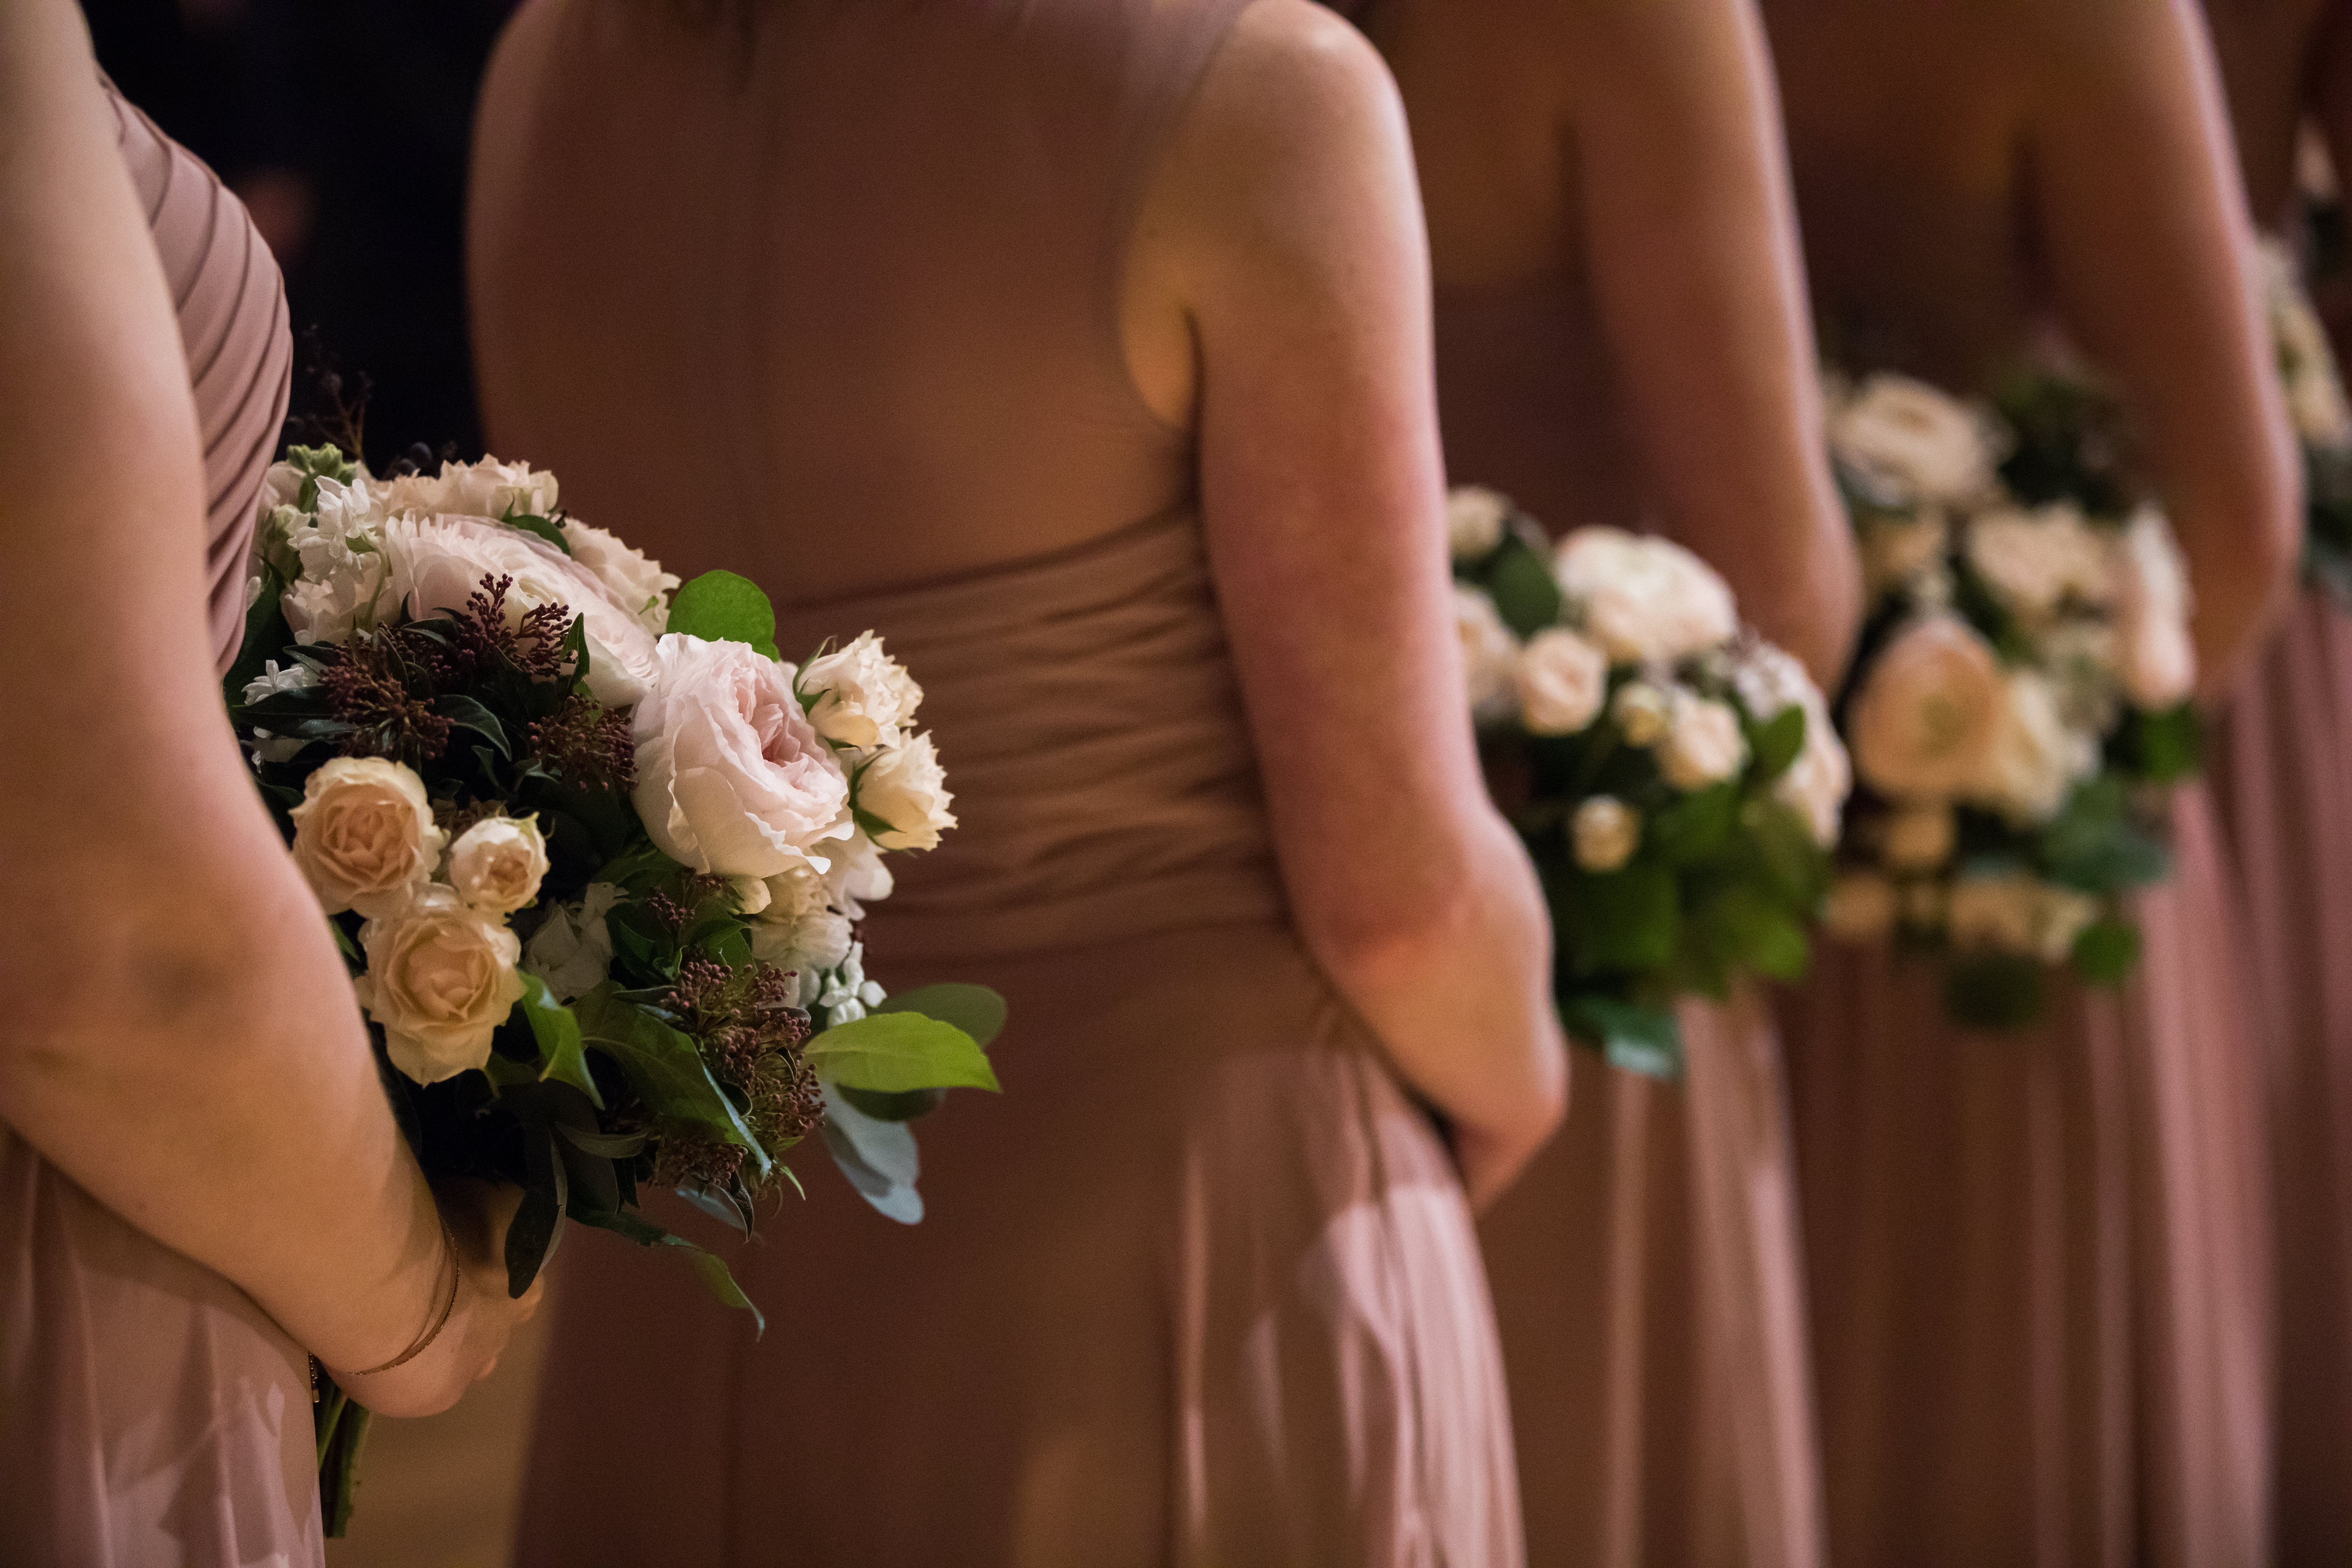 Dusty rose bridesmaids' dresses with bouquets at winter wedding ceremony at Bridgeport Art Center Skyline Loft in Chicago